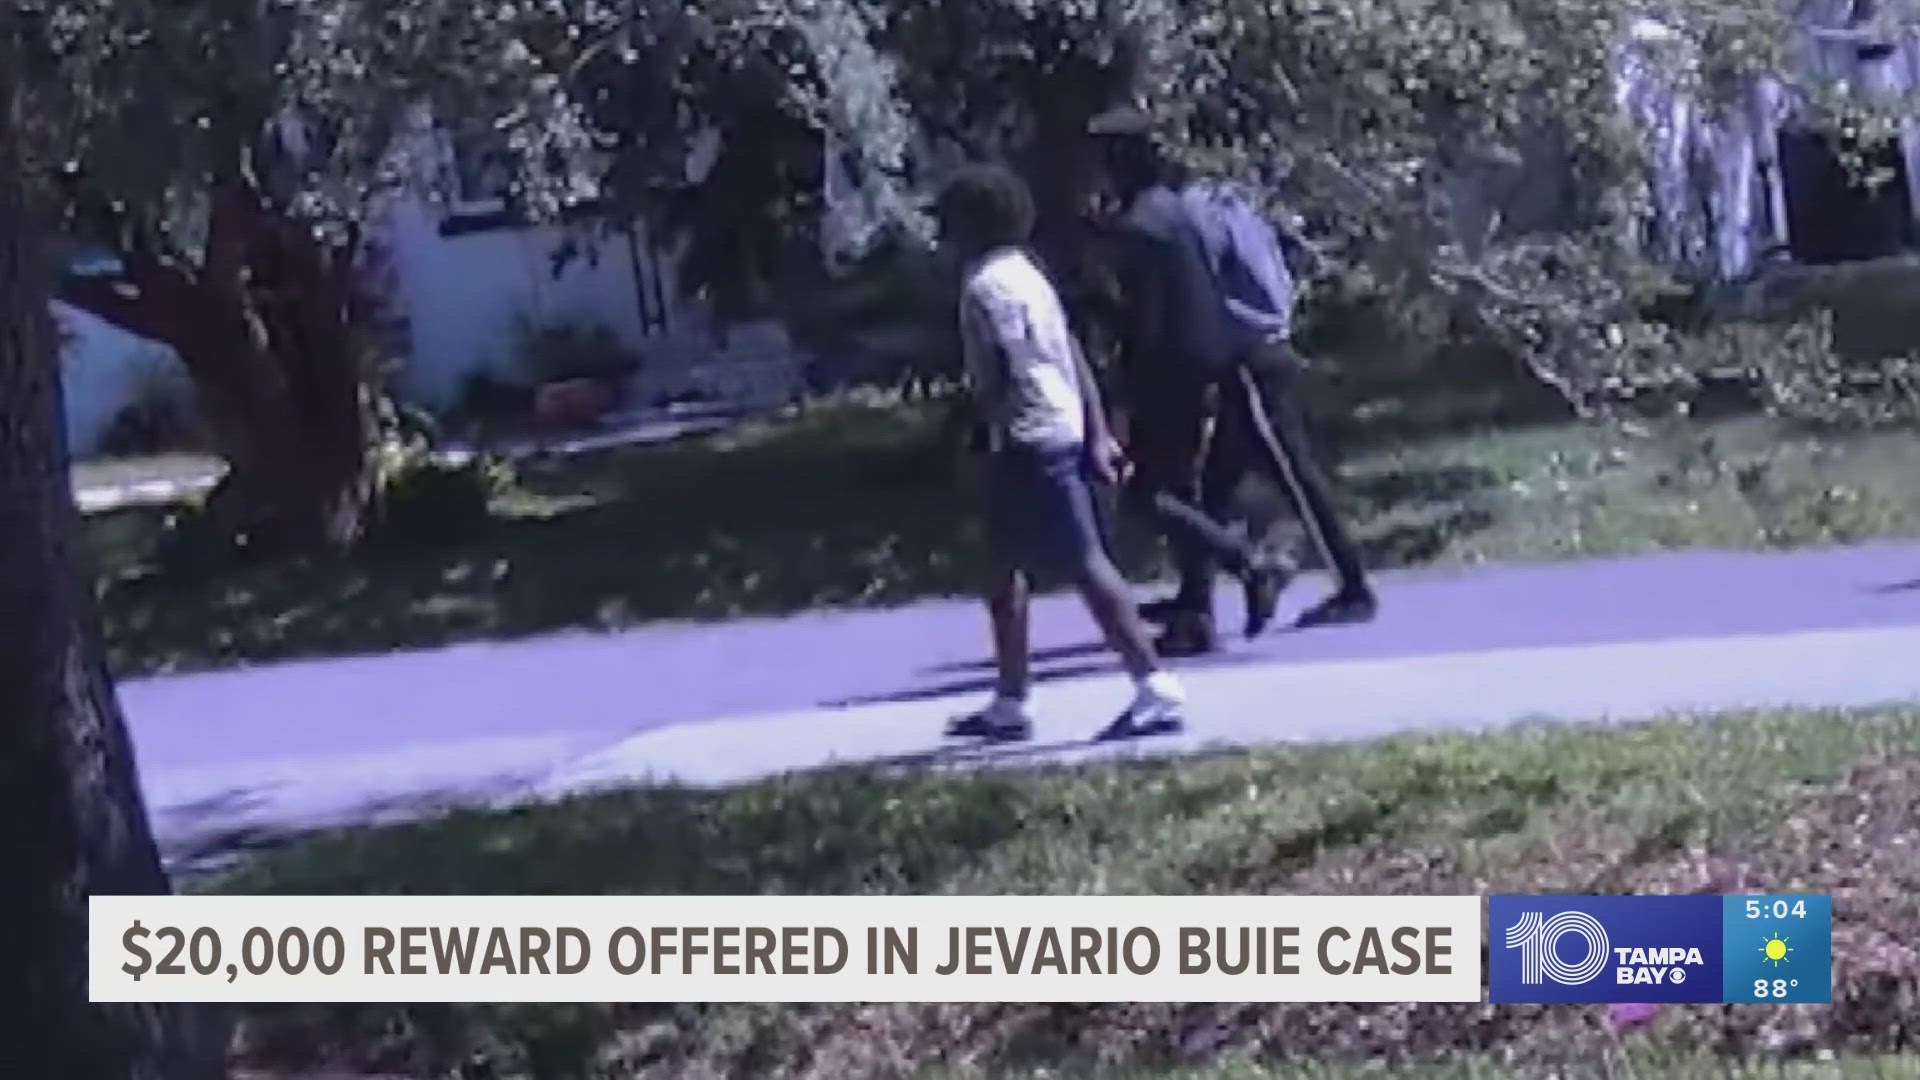 Detectives are still looking for information leading to an arrest in 14-year-old Jevario Buie’s murder.